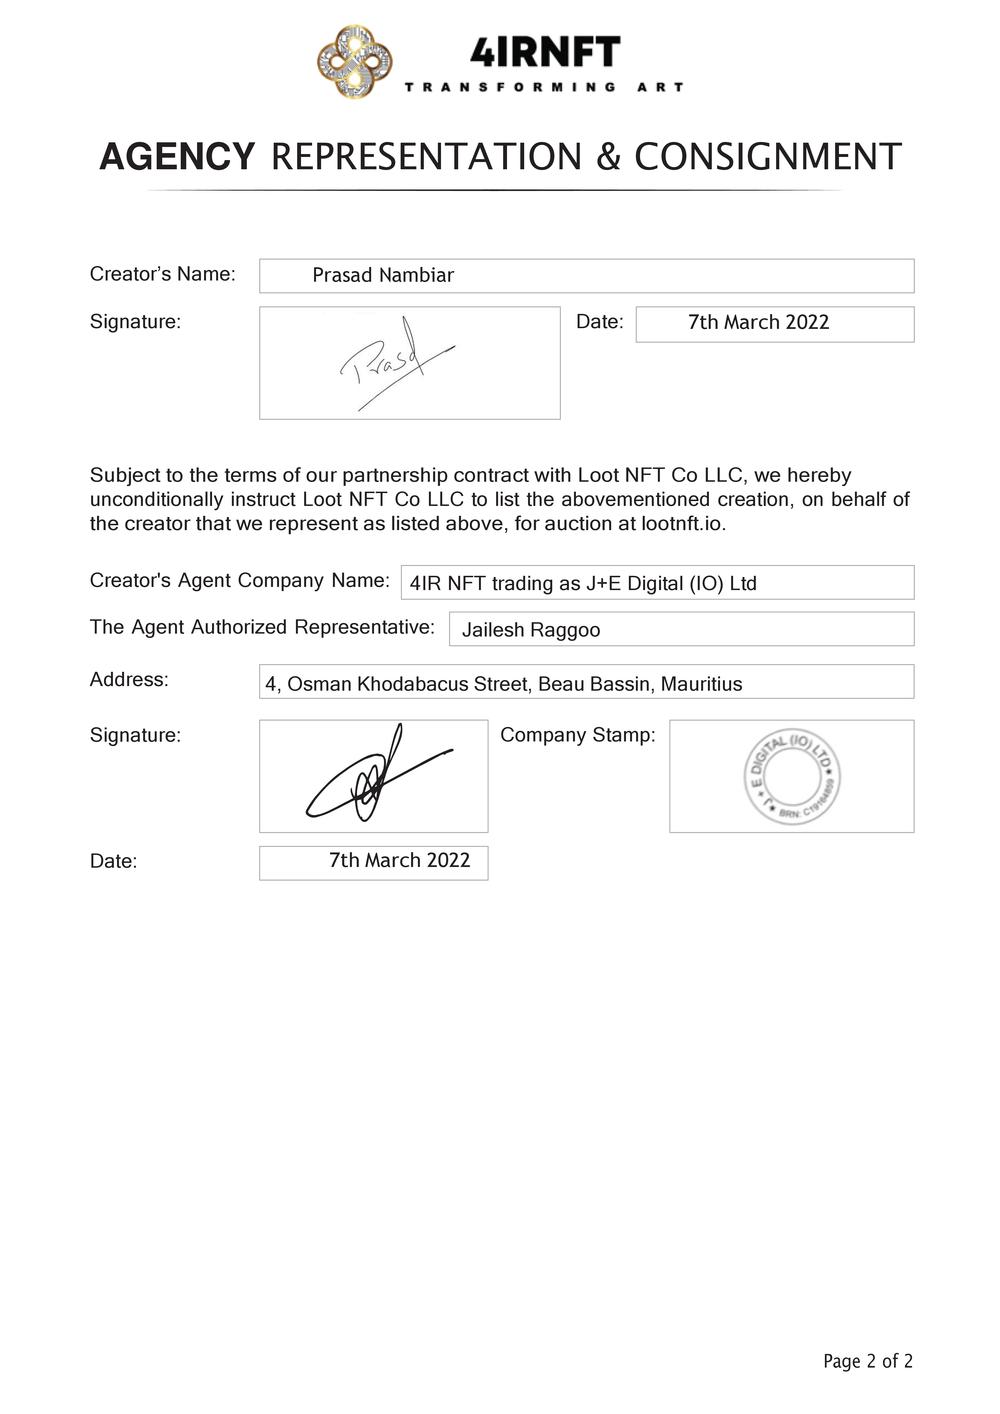 Certificate of Authenticity and Consignment - Samrat Prithviraj Chauhan